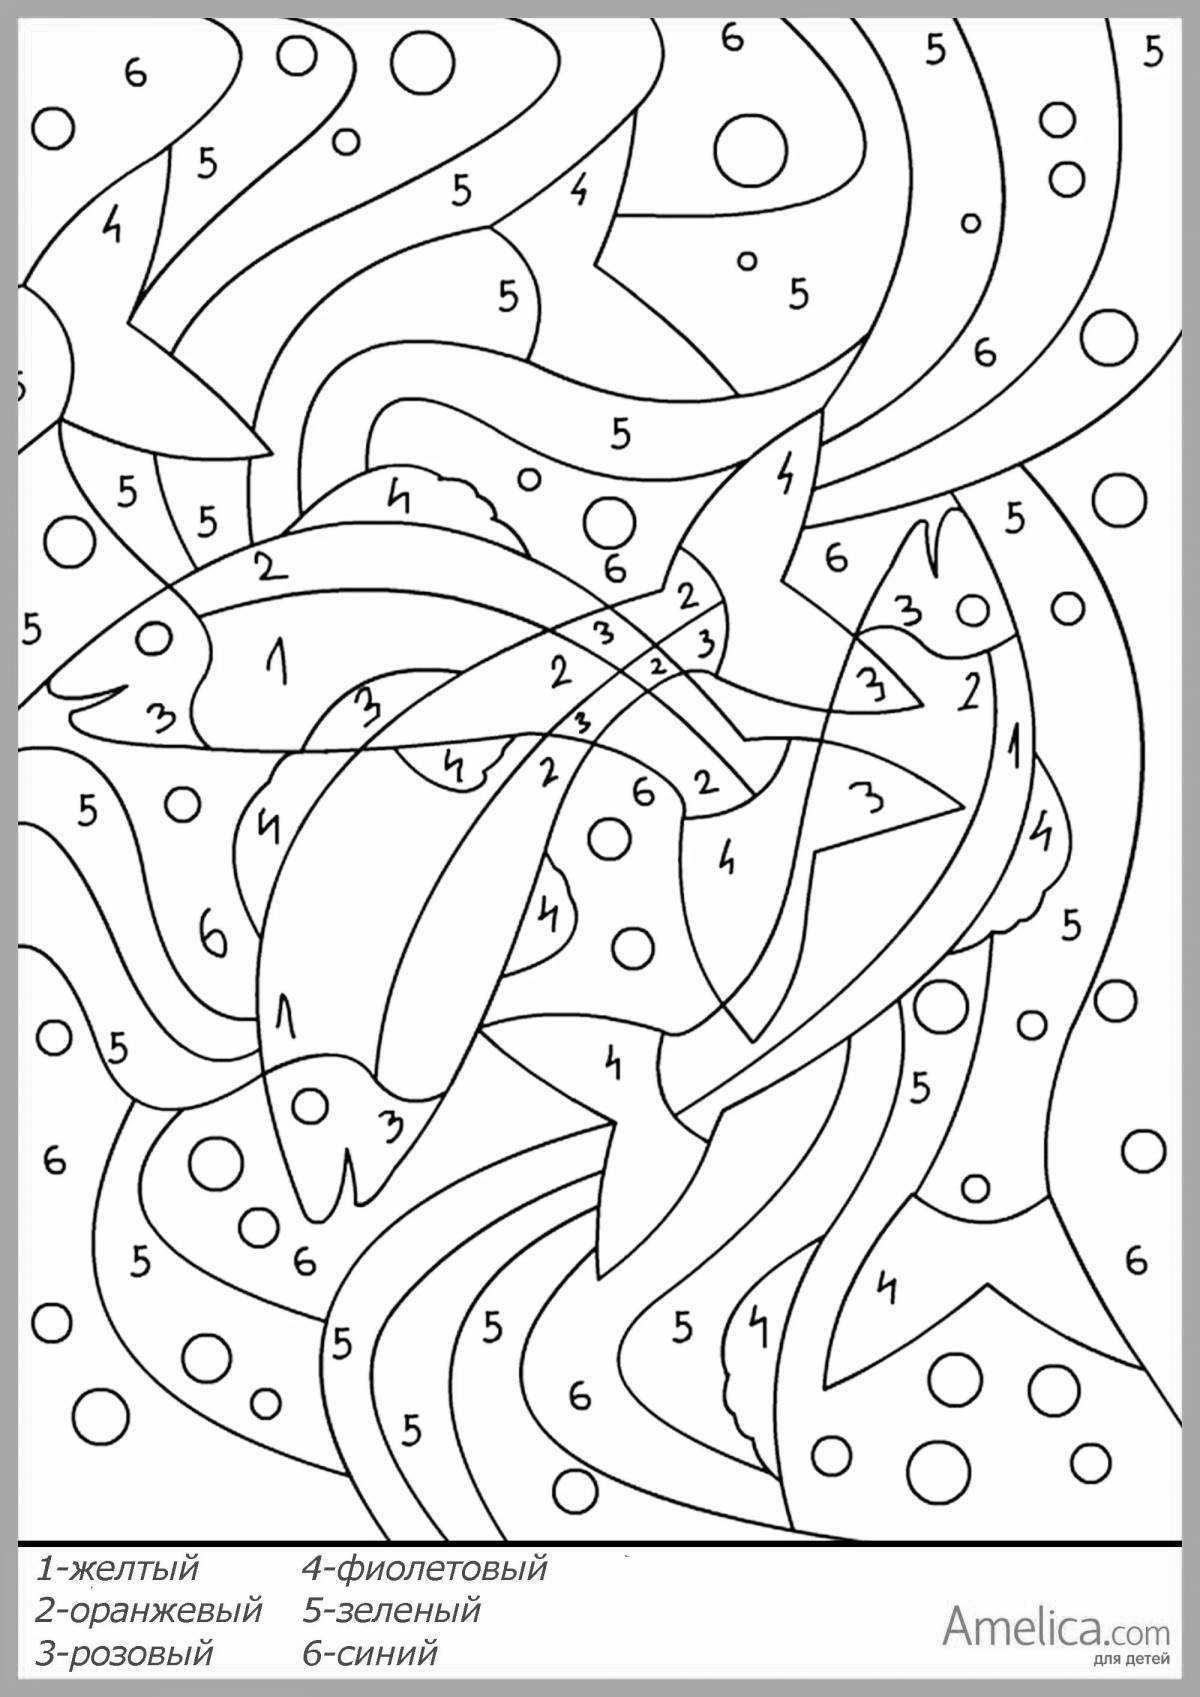 7 years of crazy coloring pages